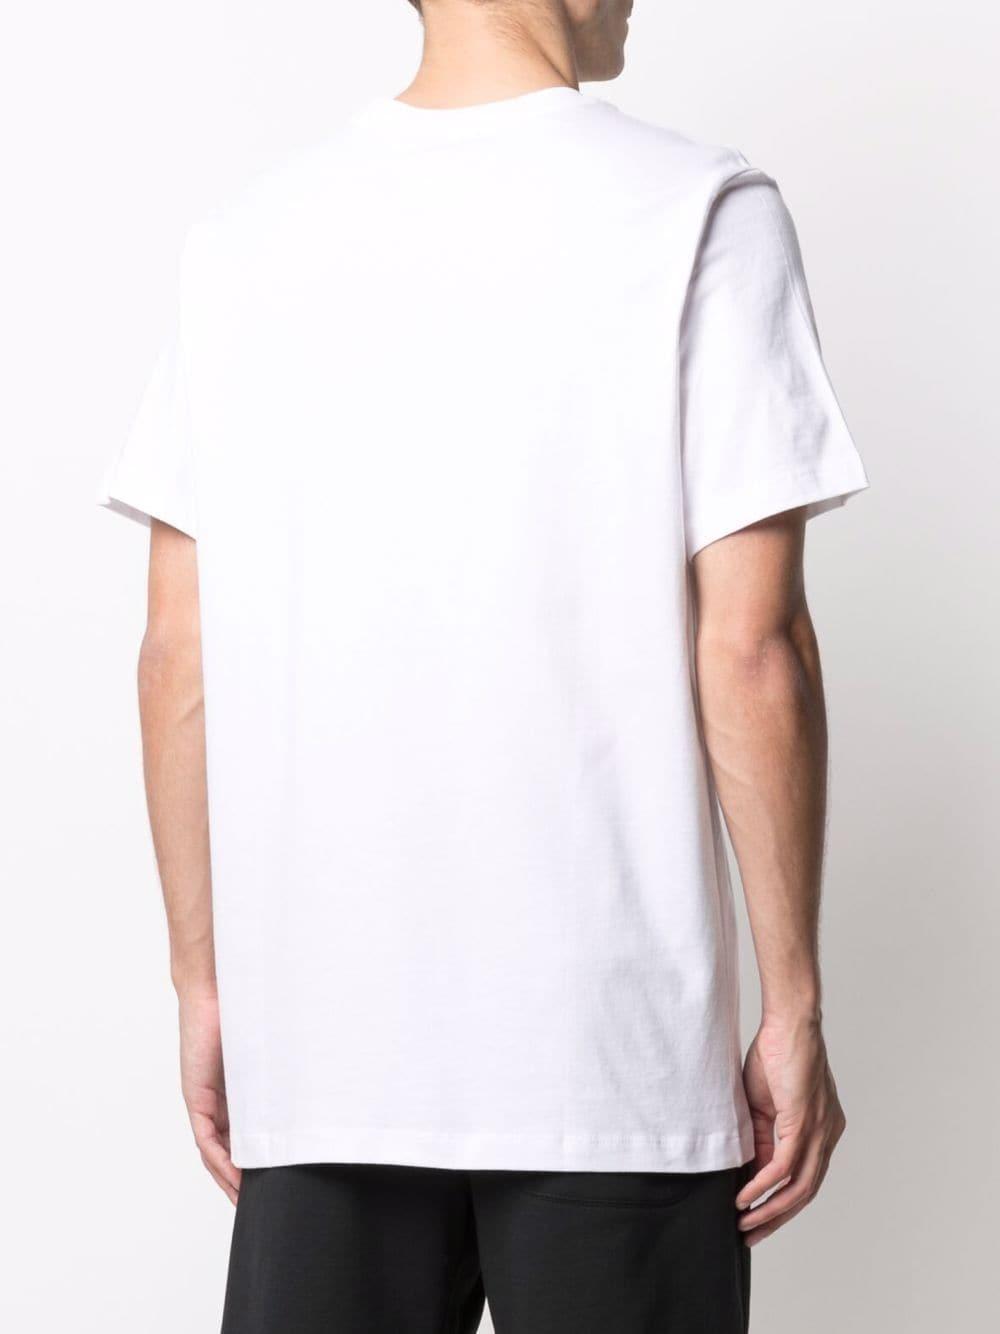 Nike Pyramid-print Cotton T-shirt in White for Men | Lyst